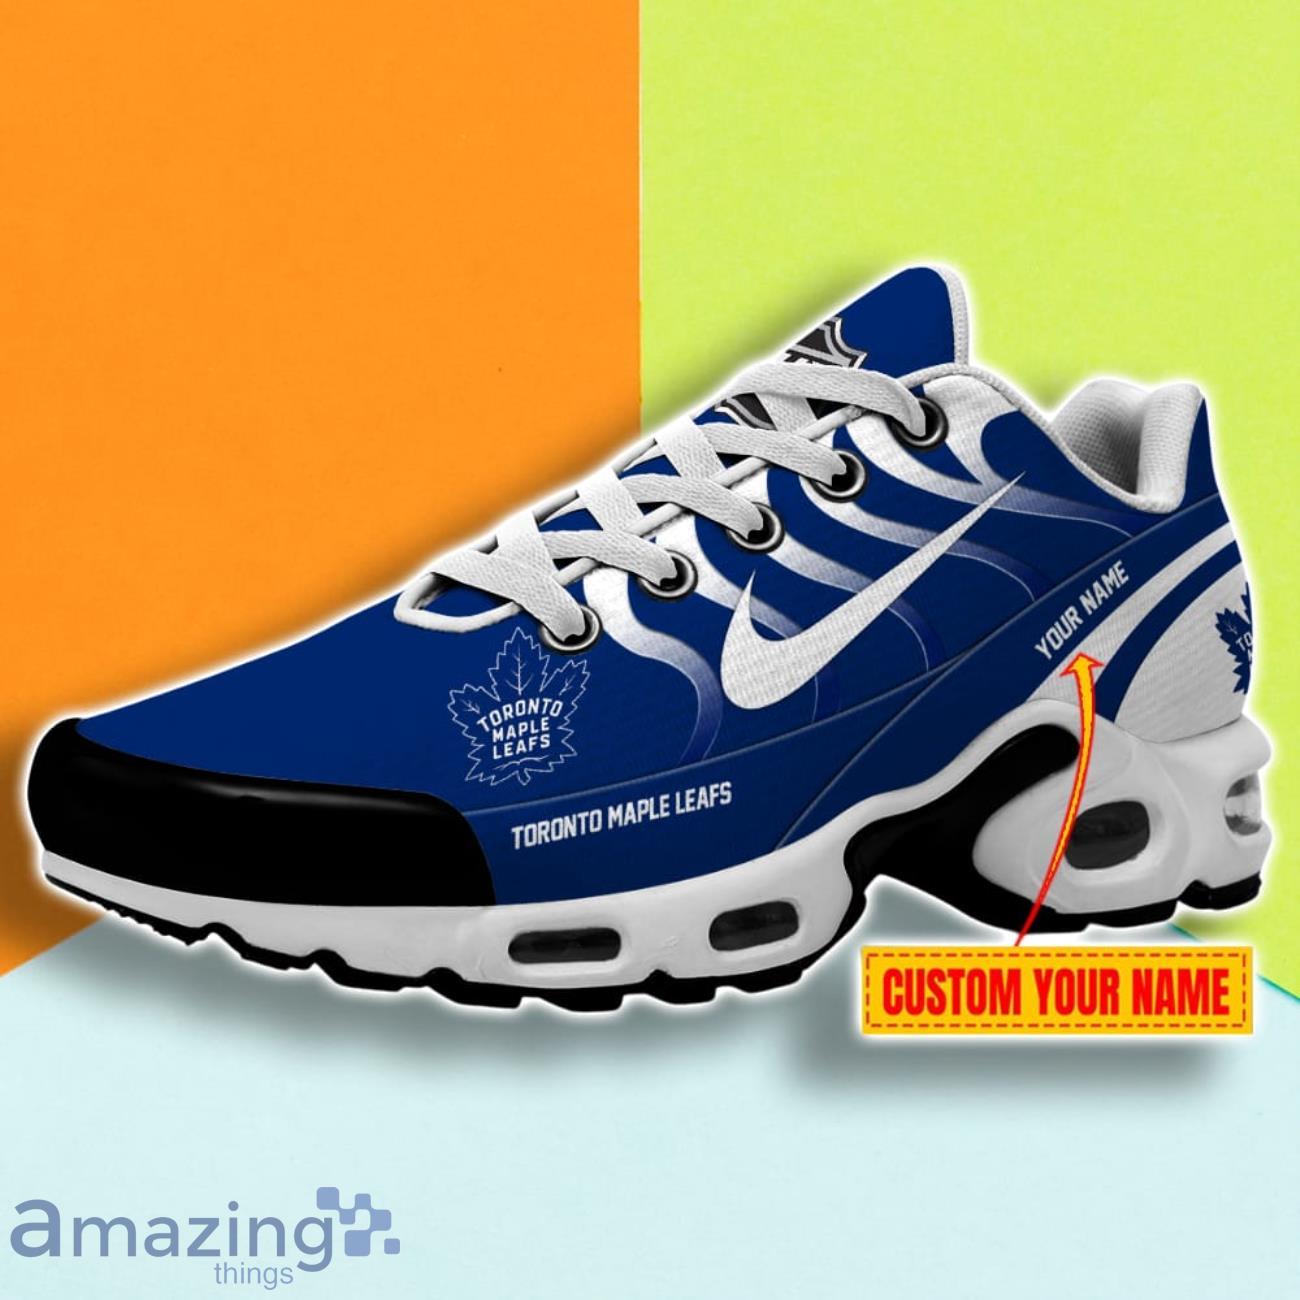 Toronto Maple Leafs NHL TN Sport Shoes Custom Name Enthusiastic Support From Fans Product Photo 1